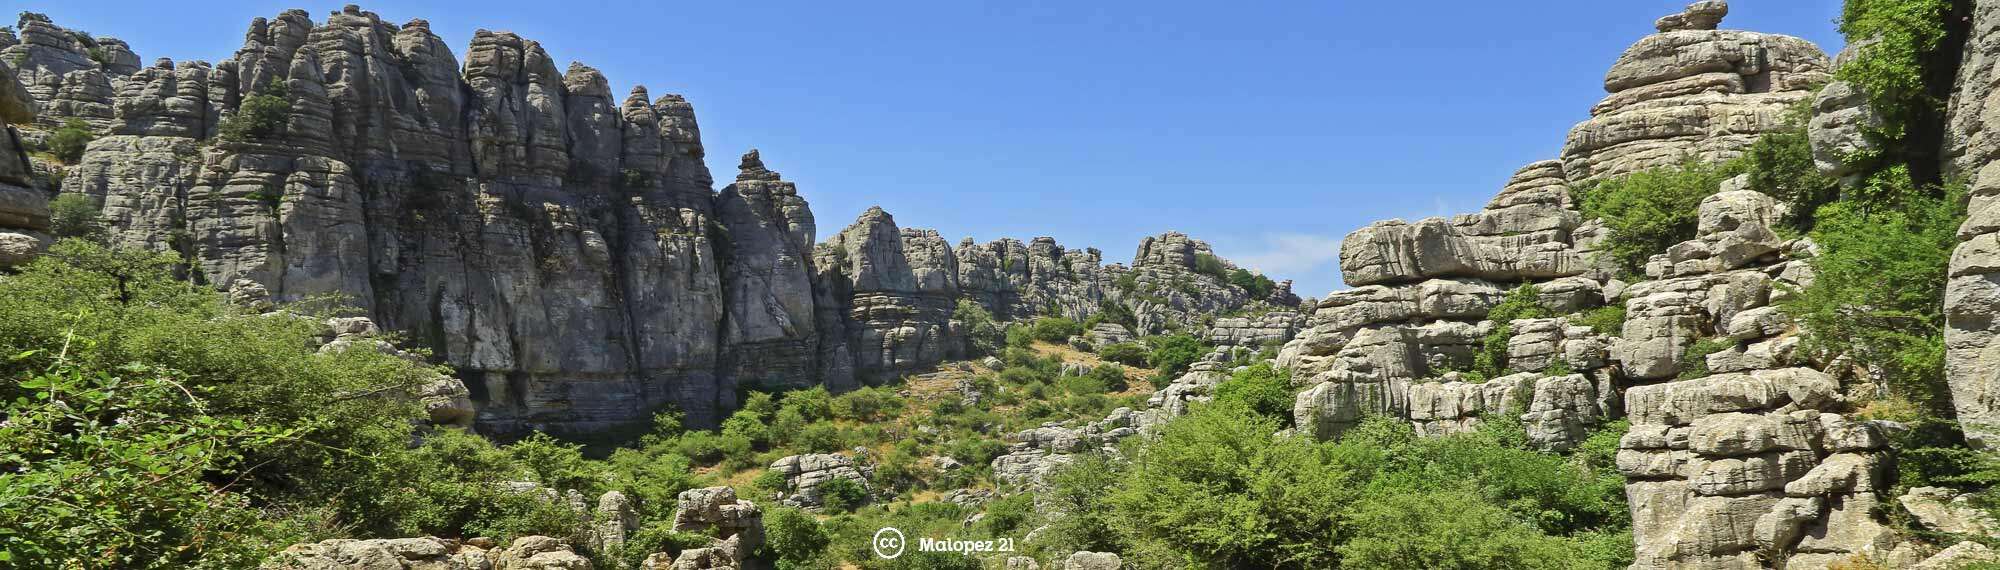 Route in the Torcal of Antequera